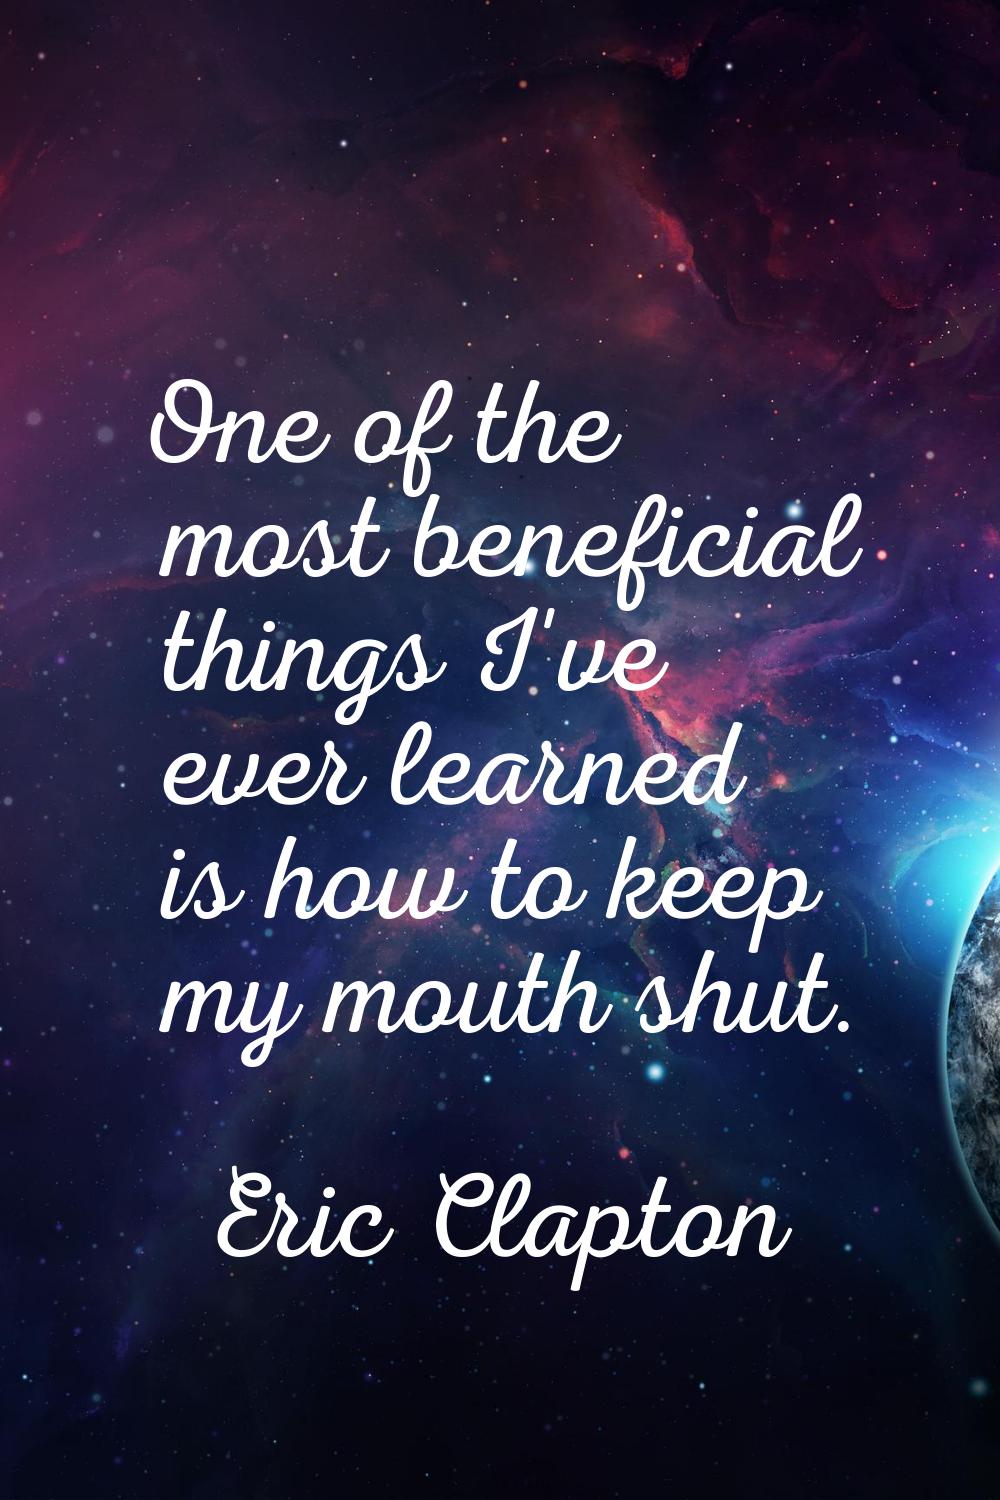 One of the most beneficial things I've ever learned is how to keep my mouth shut.